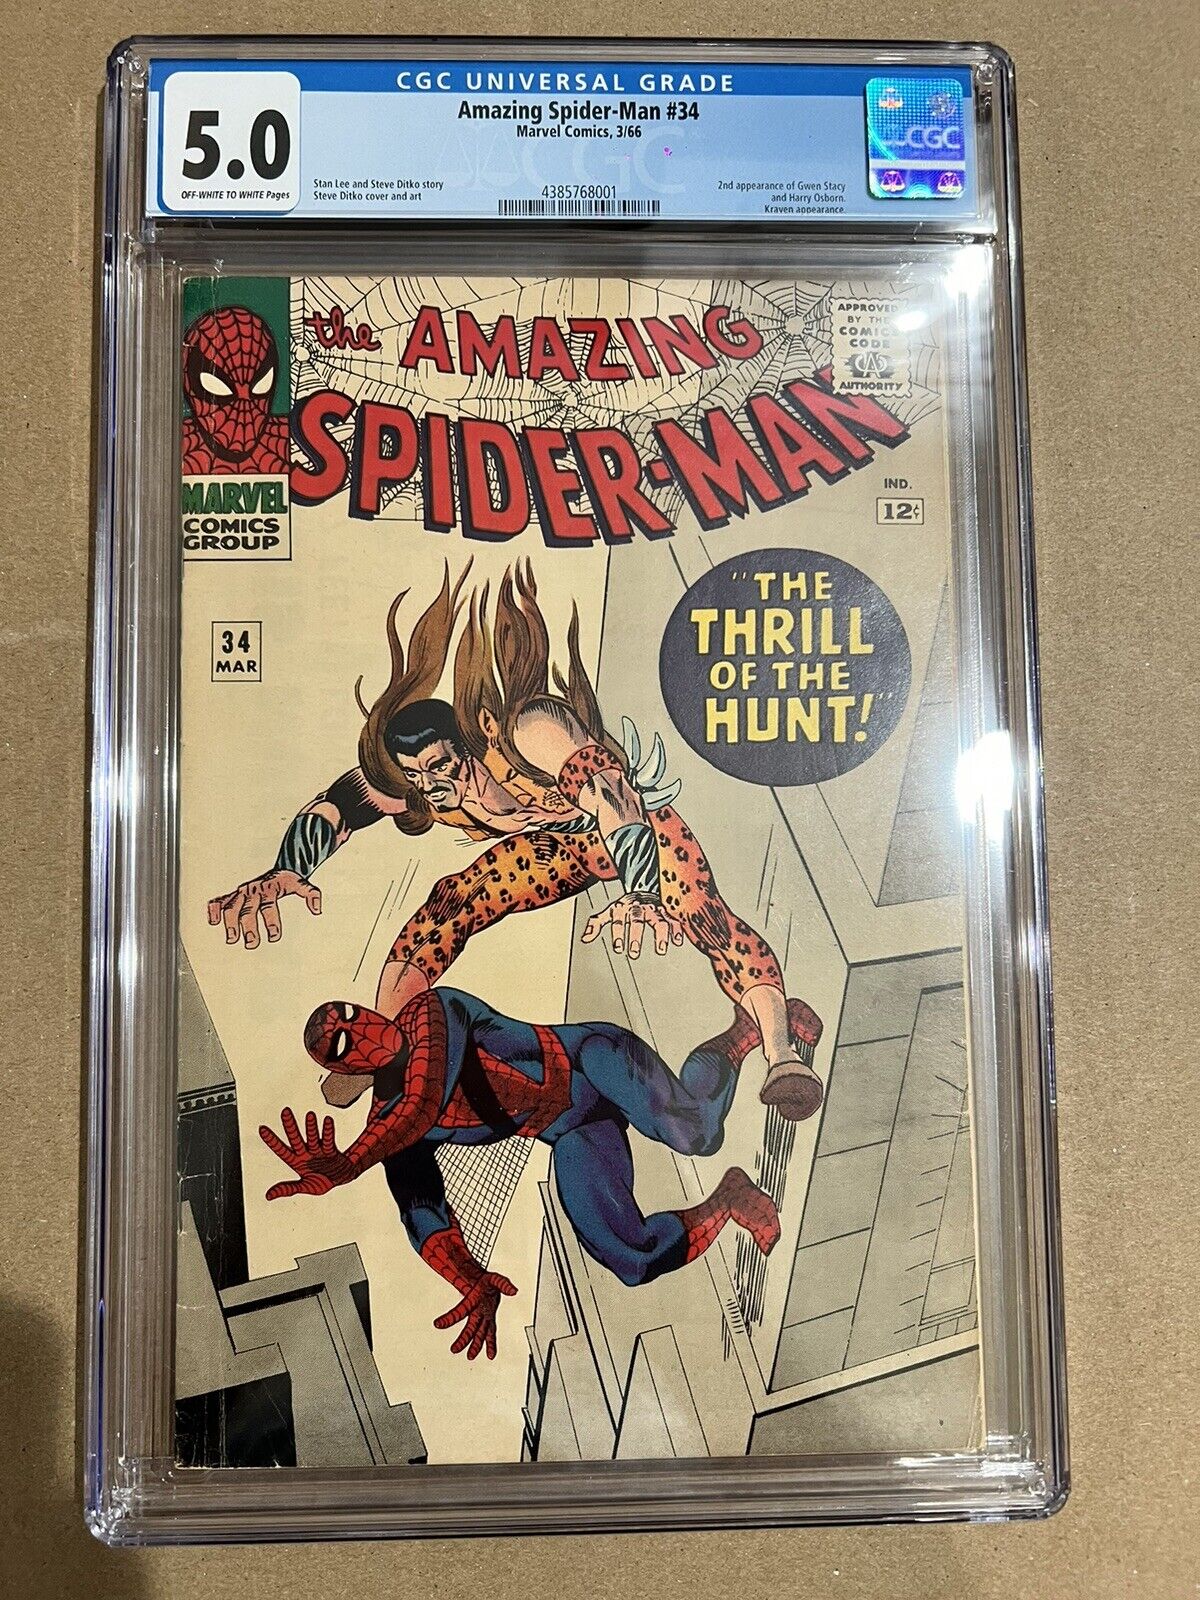 AMAZING SPIDER-MAN #34 CGC 5.0 KRAVEN 2nd APPEARANCE GWEN STACY, NED LEEDS 1966